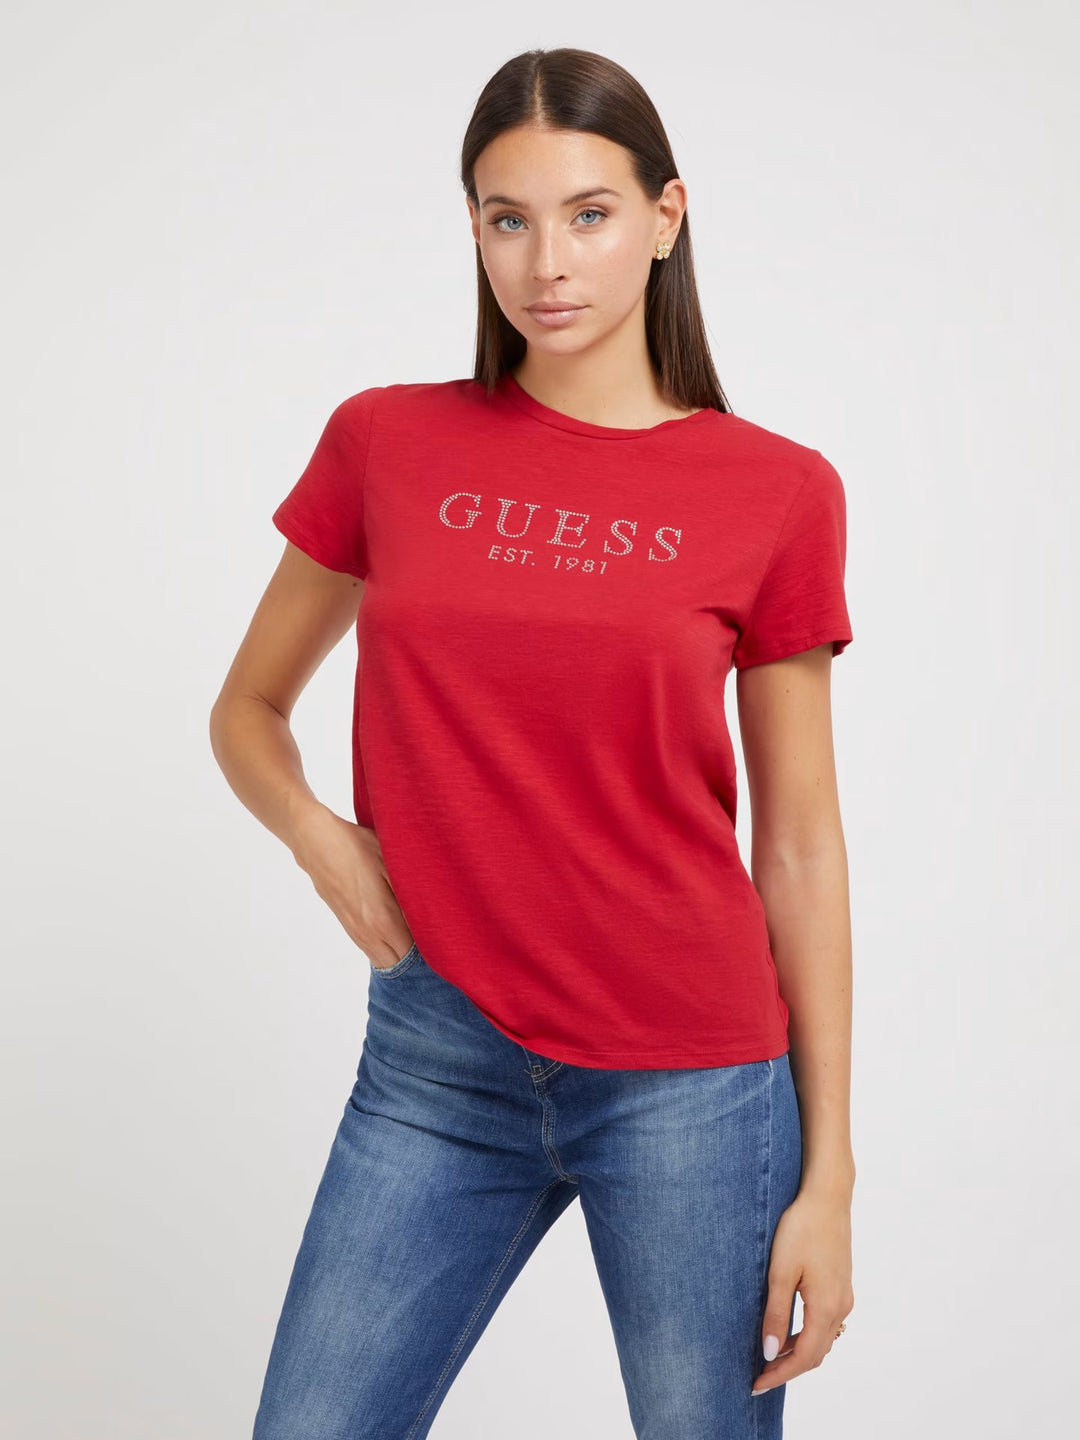 GUESS 1981 CRYSTAL EASY TEE